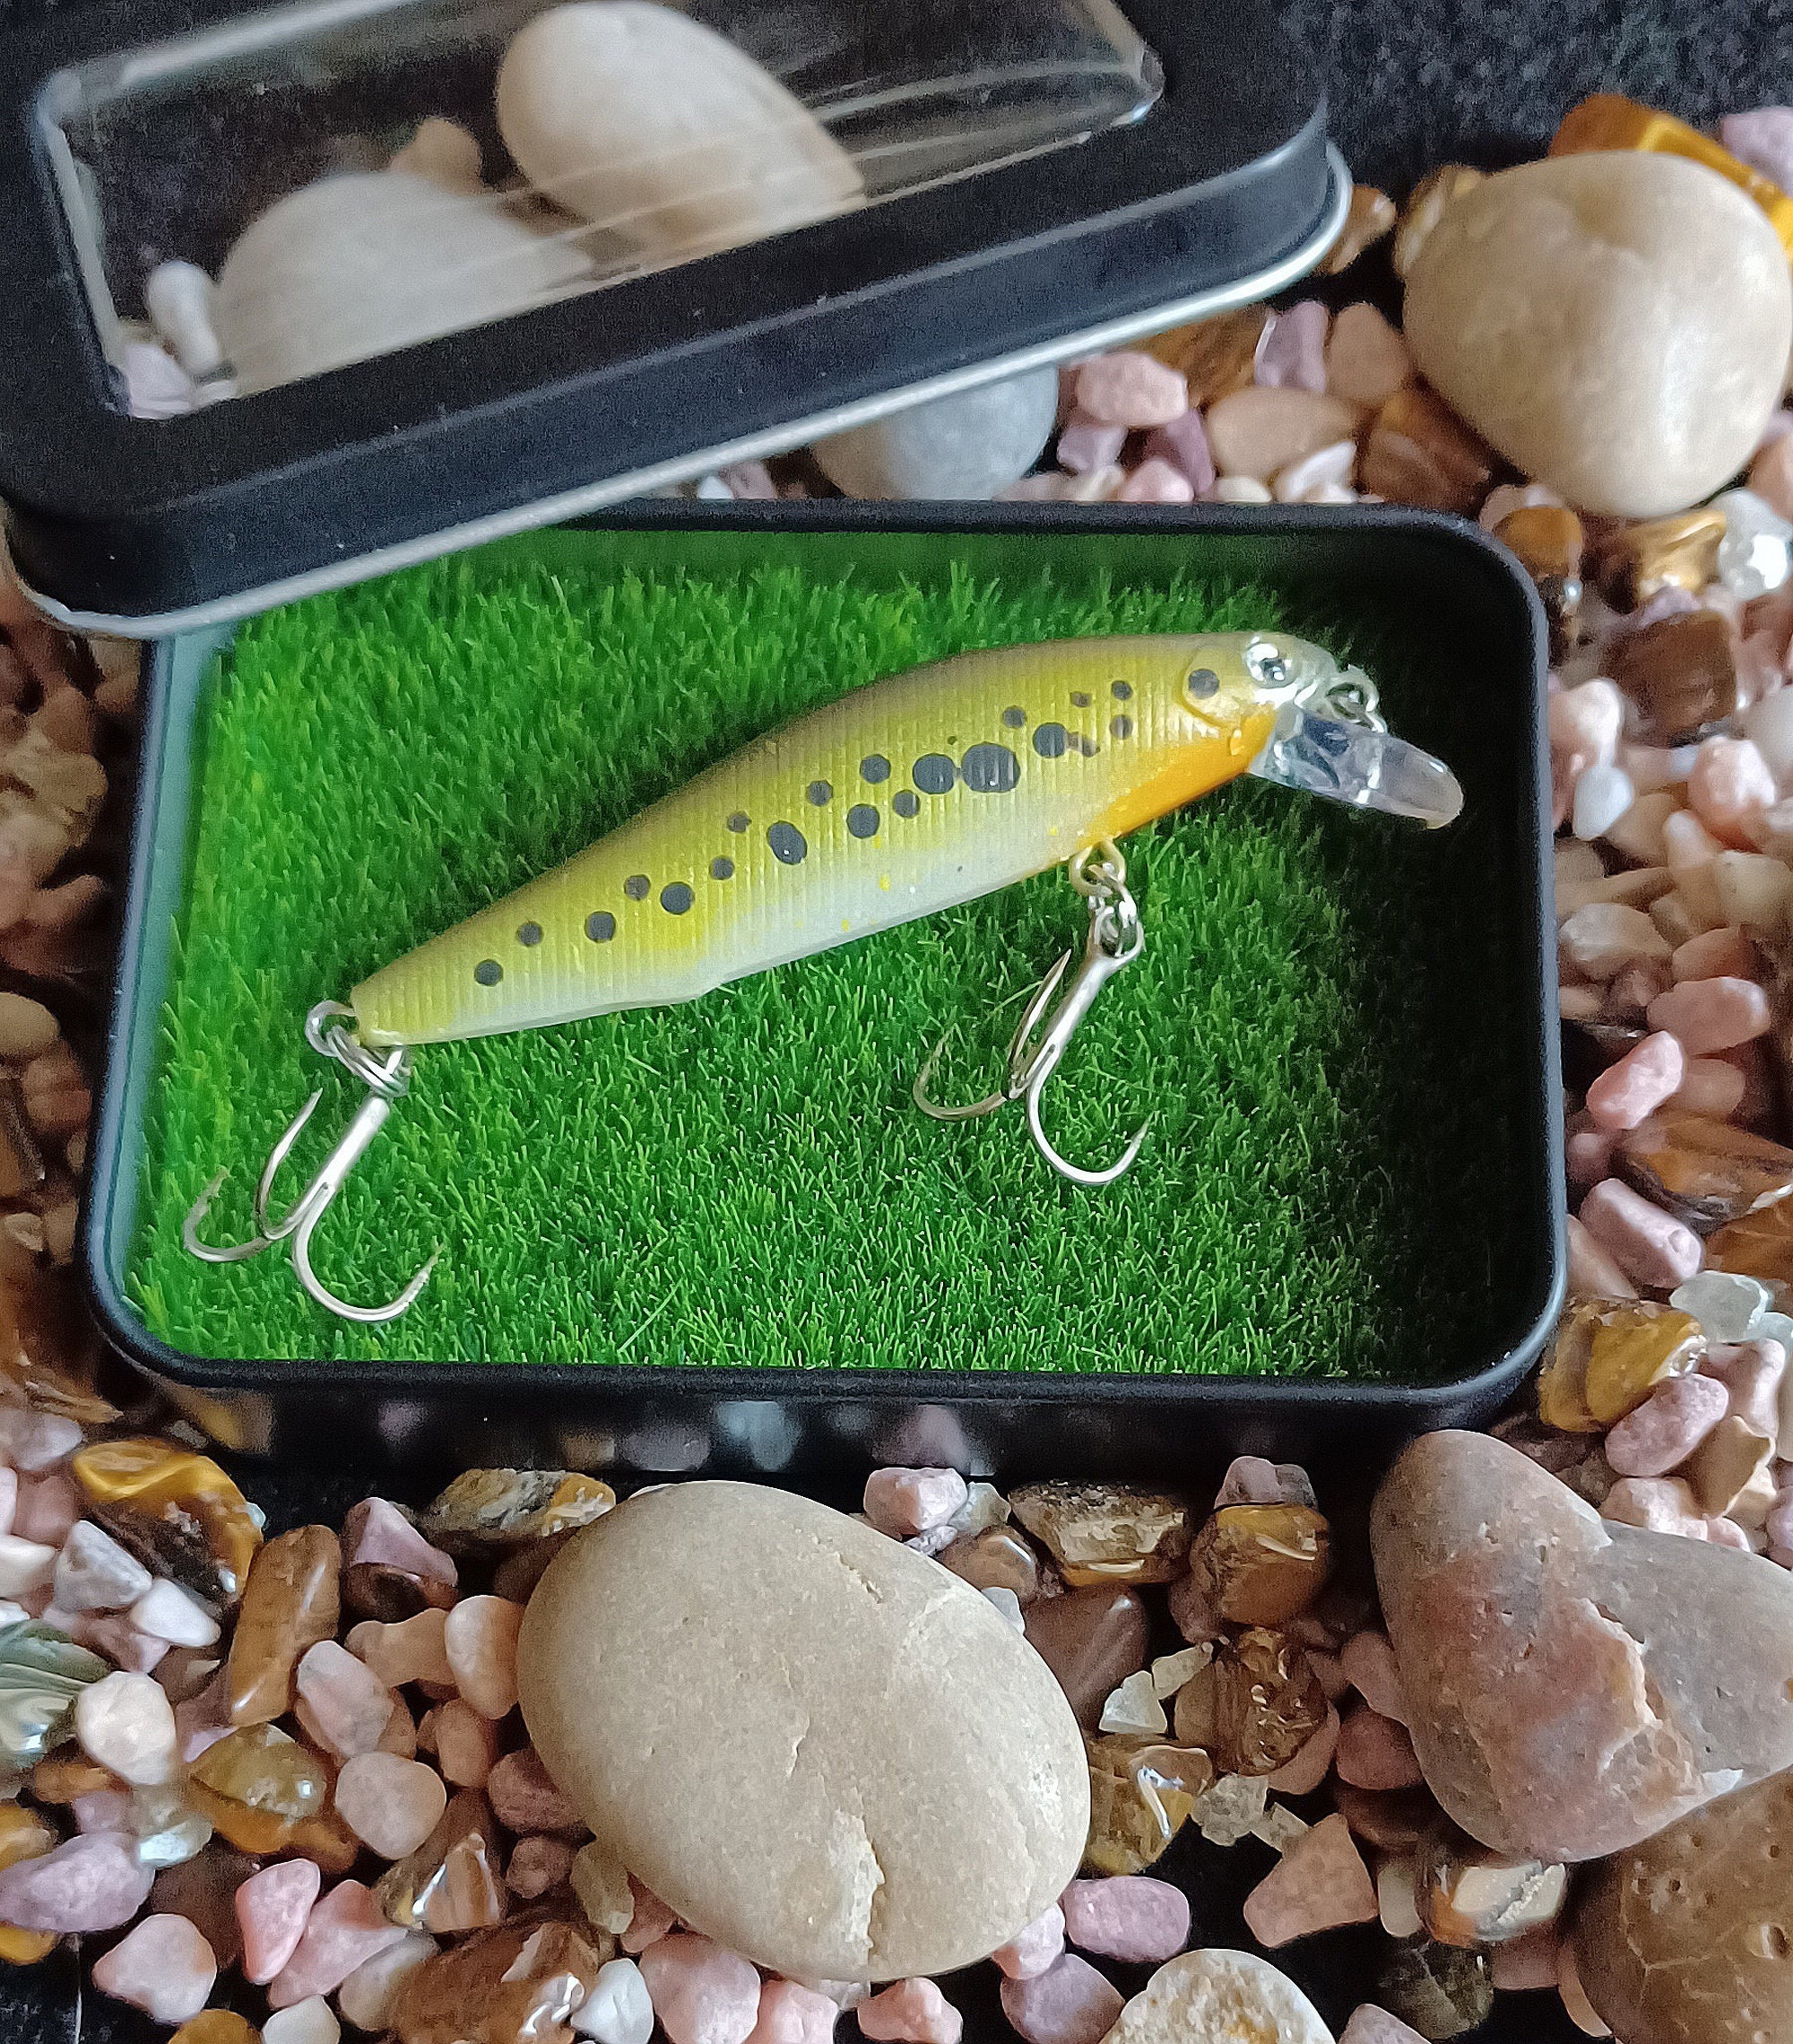 Trout lures - 100% hand made from balsa wood – PAN Handmade LURES